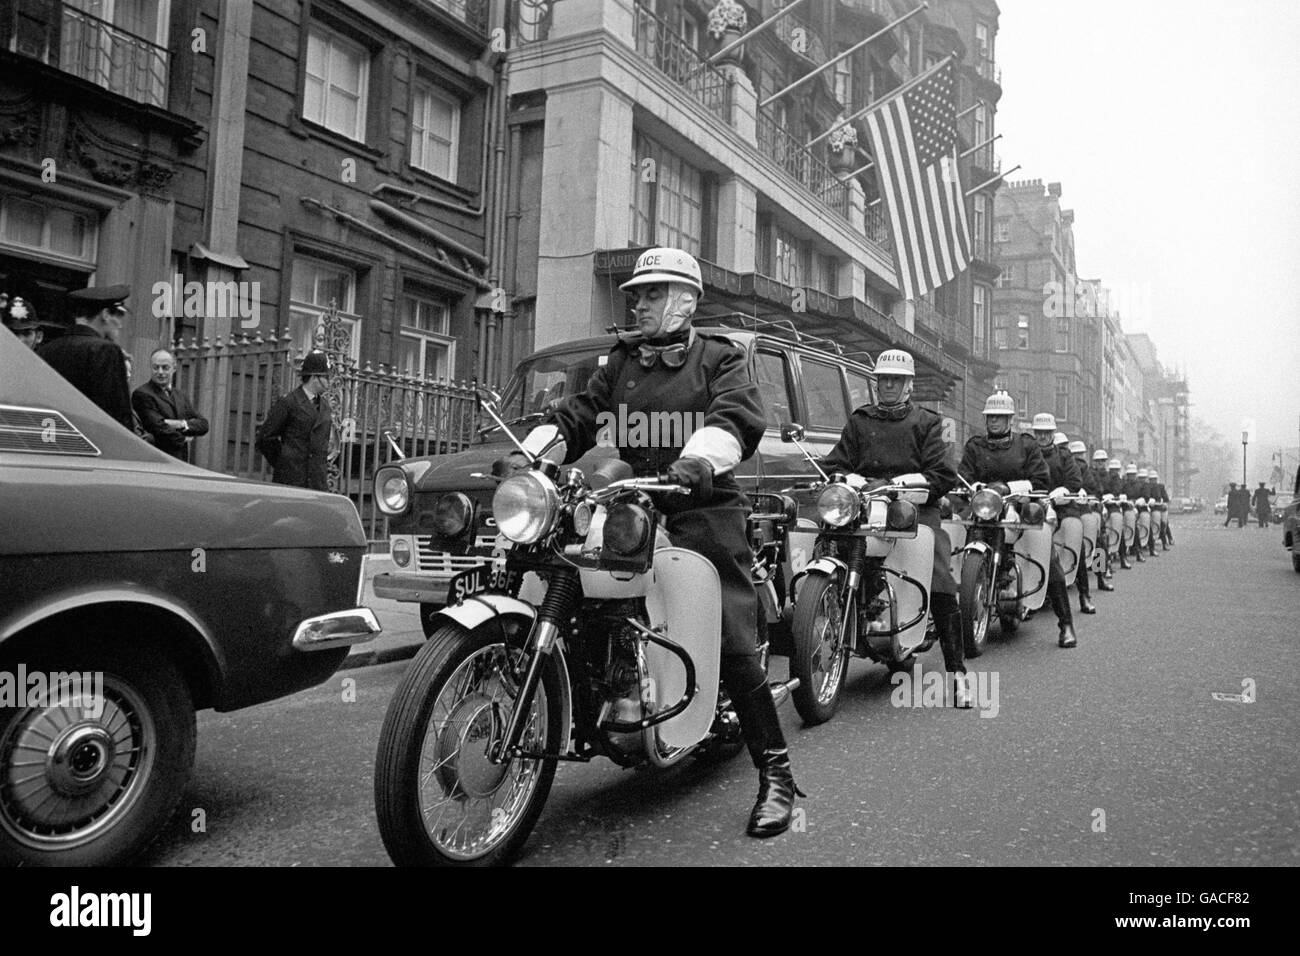 Motorcycle police Black and White Stock Photos & Images - Alamy